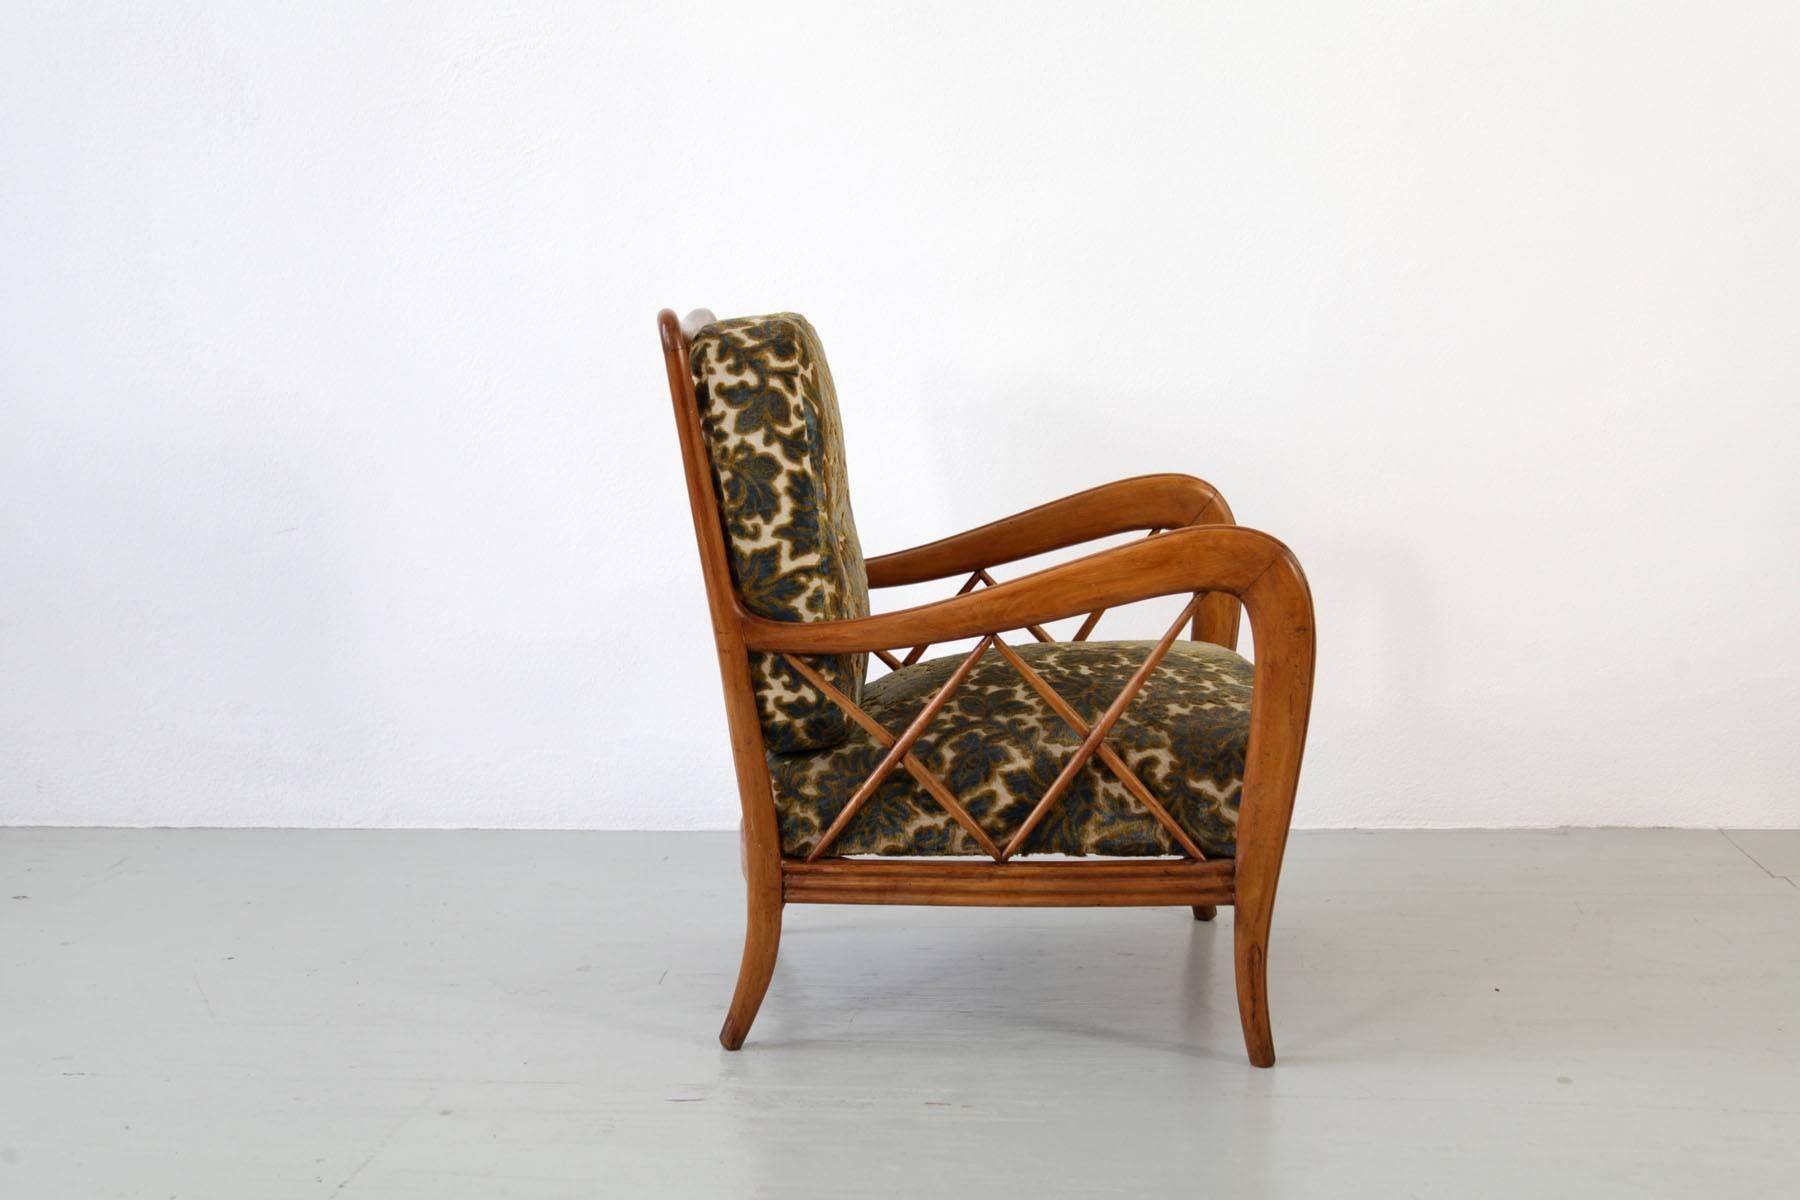 Mid-20th Century Paolo Buffa Italian Pair of Wooden Armchairs with floral patterned Fabric, 1940s